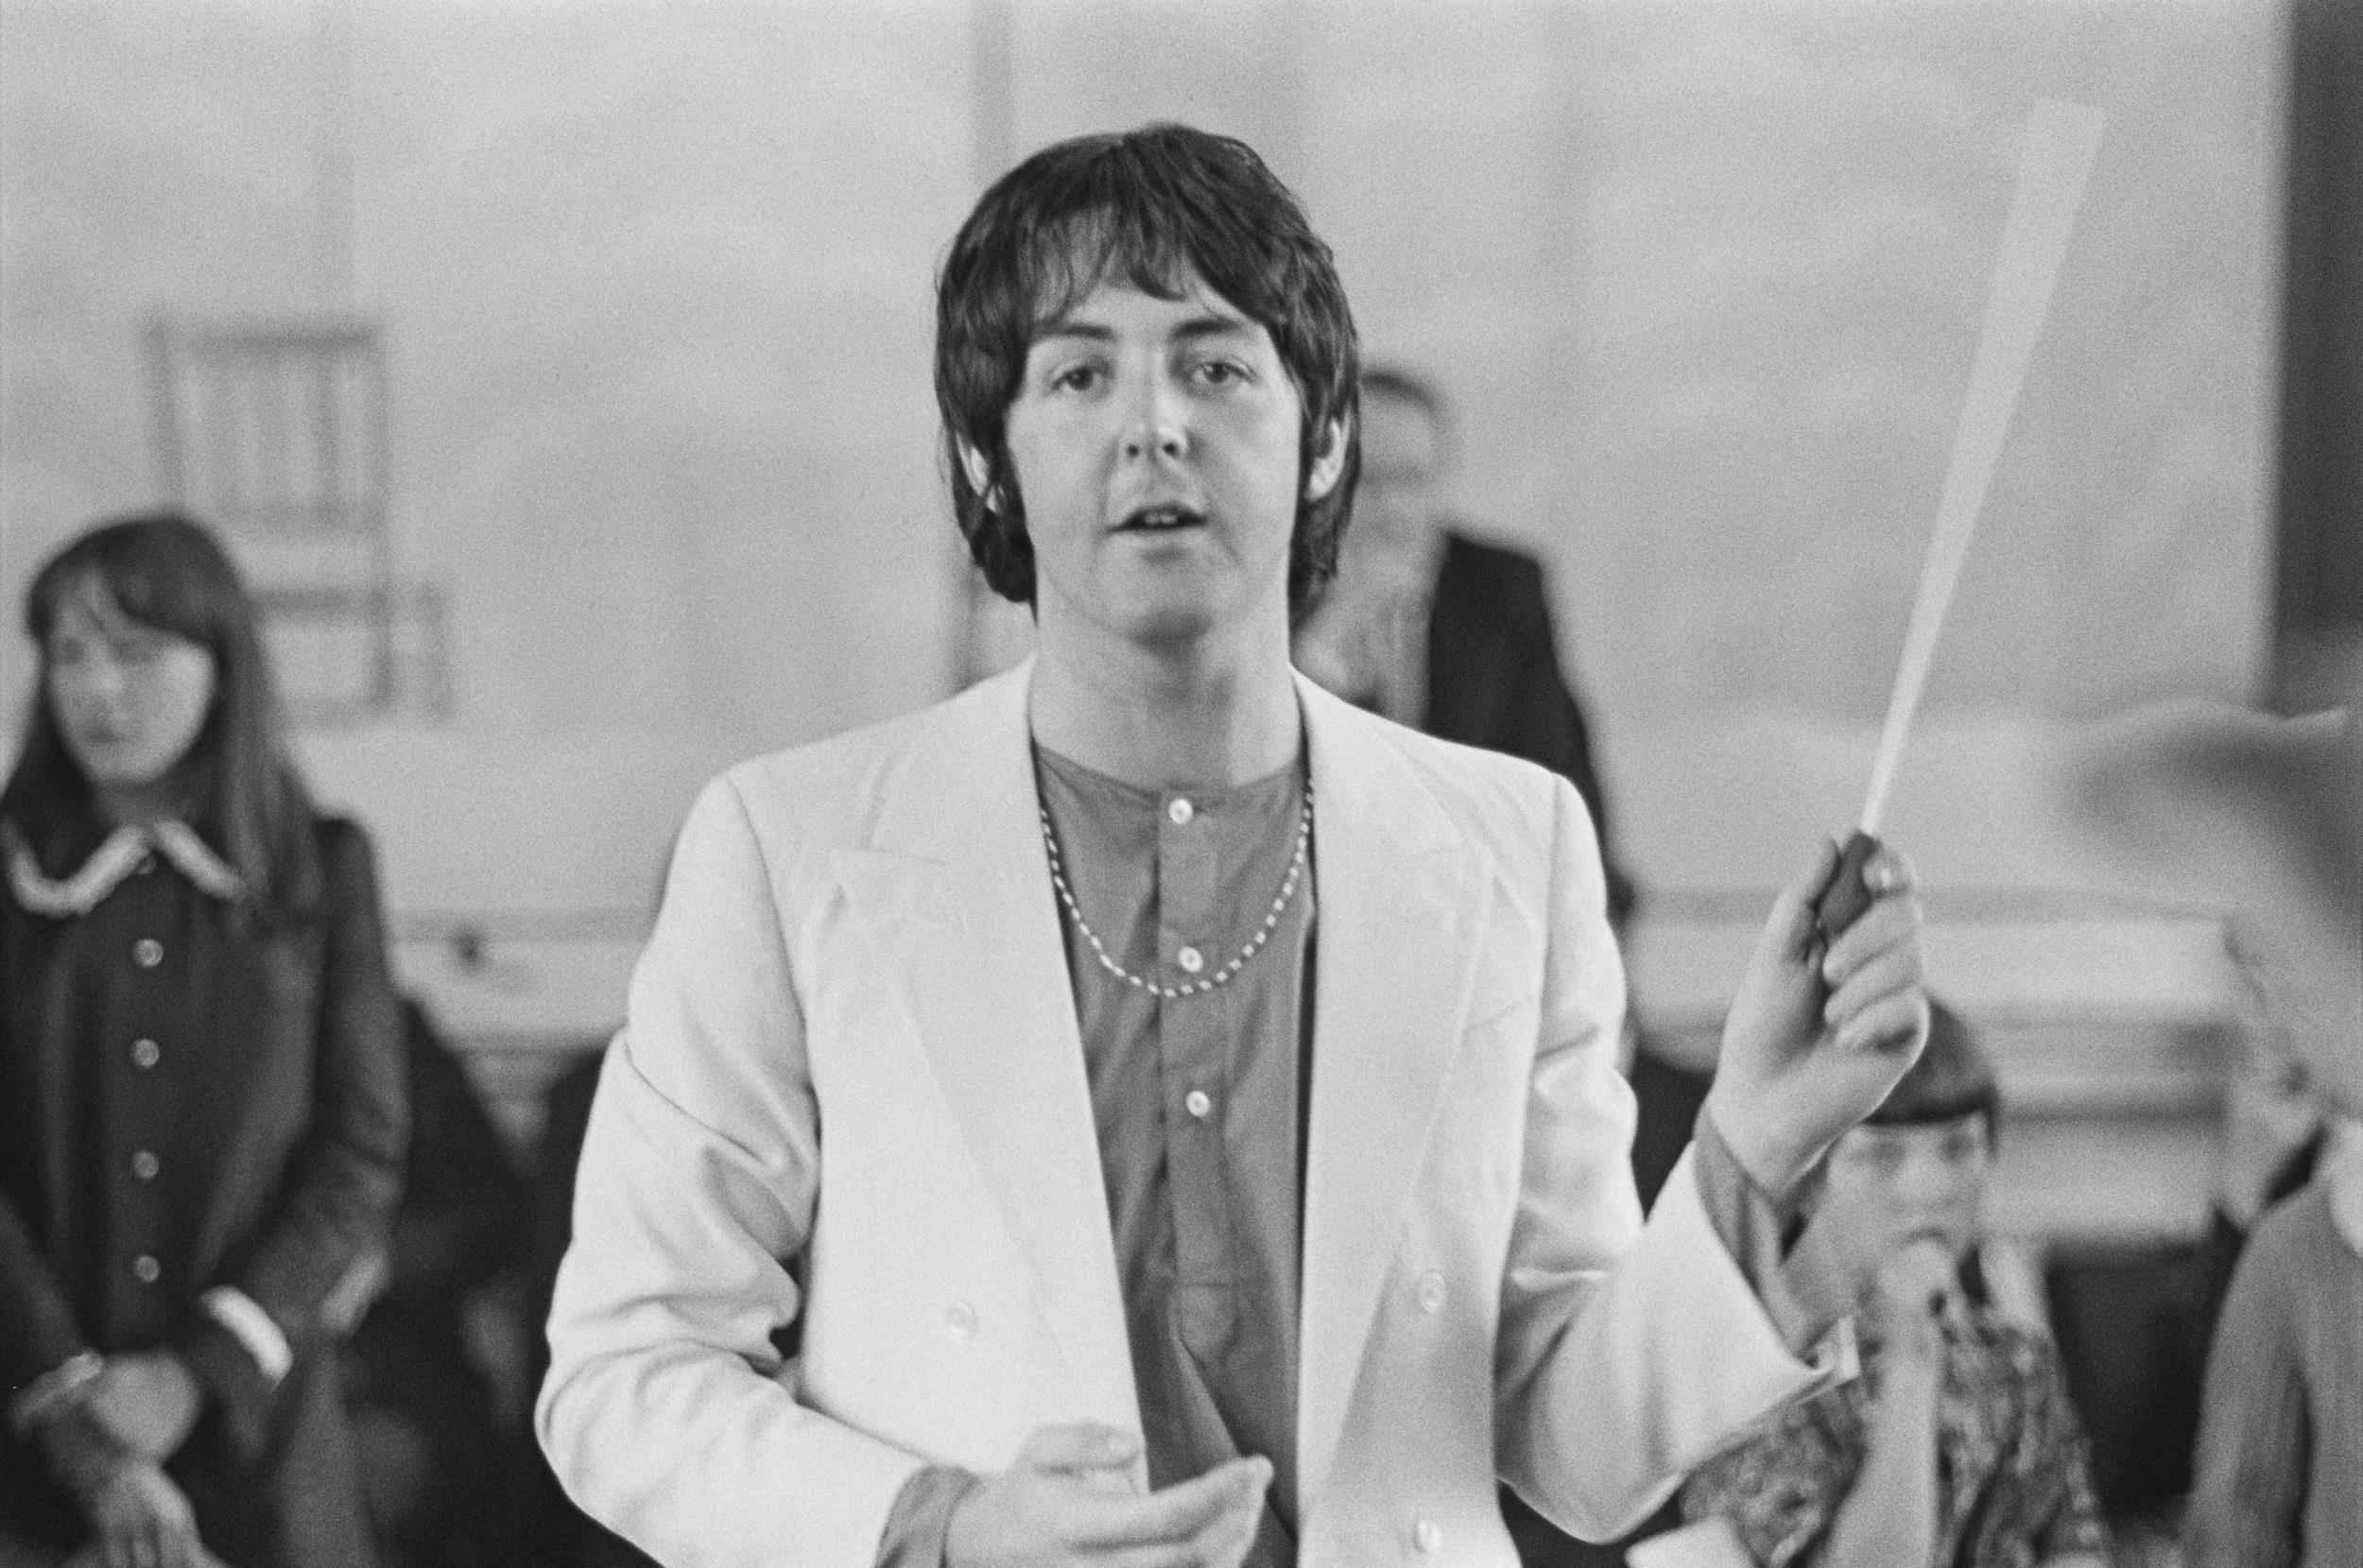 <p>Opinions vary among Beatles fans, save for in regard to “Hey Jude." This is a top-five track from the Fab Four regardless of which era or style you prefer. The song began as a McCartney-penned salve for young Julian Lennon, who was dealing with his parents’ divorce in the late 1960s, but it was retitled simply because “Jude” sounded better than “Jules." It’s one of the most uplifting songs ever recorded, a reliable chin-up in the darkest of moments.</p><p>You may also like: <a href='https://www.yardbarker.com/entertainment/articles/20_extremely_long_movies_that_are_extremely_good/s1__40256868'>20 extremely long movies that are extremely good</a></p>